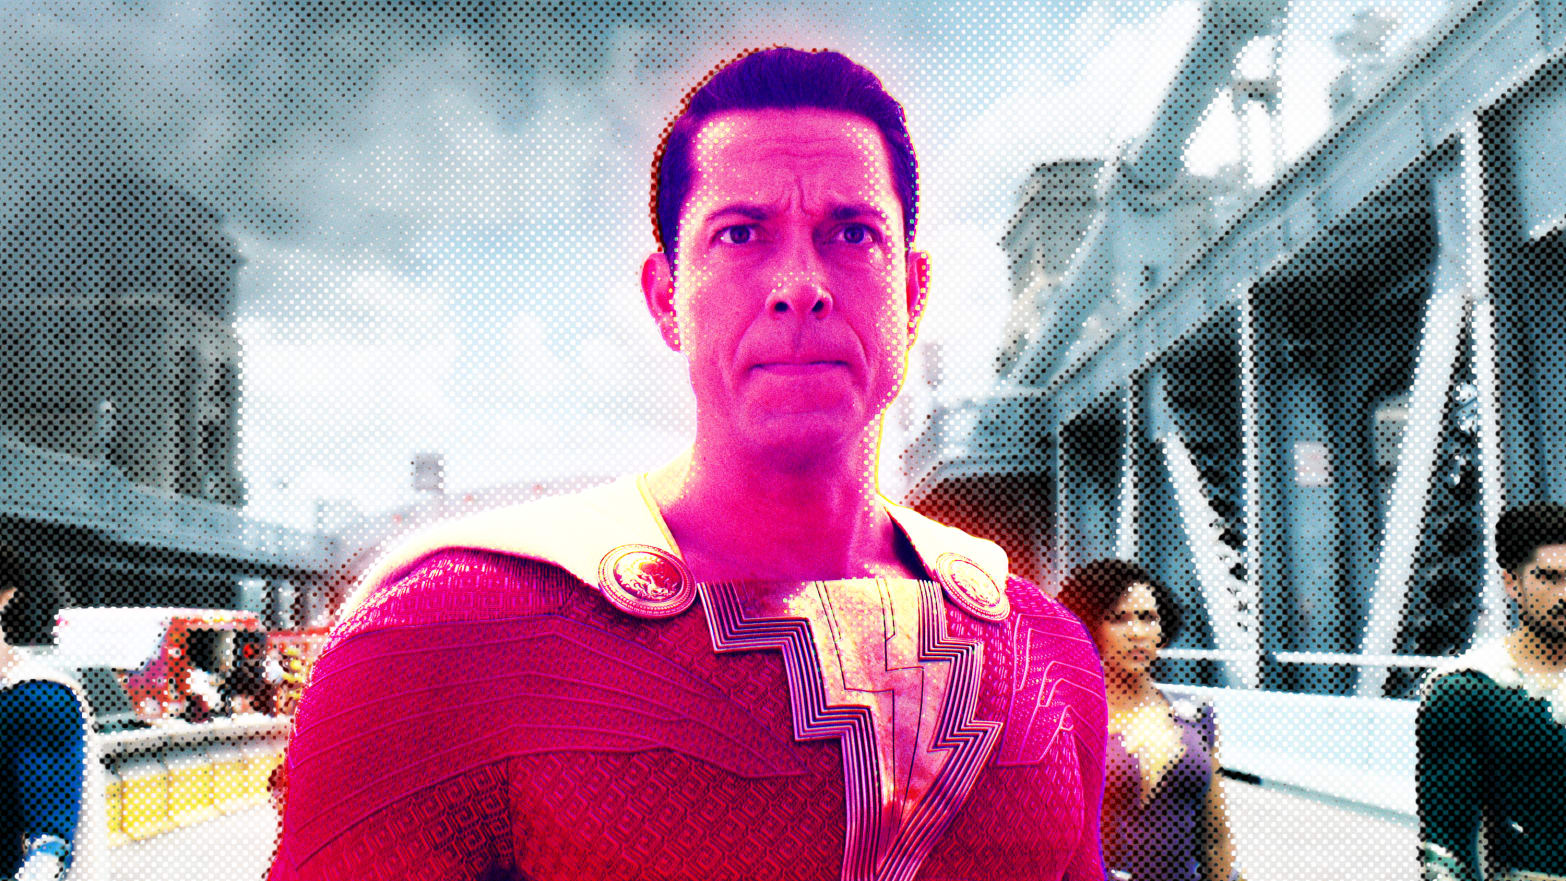 Shazam! Fury of the Gods' Review: The Gods Should Be Furious